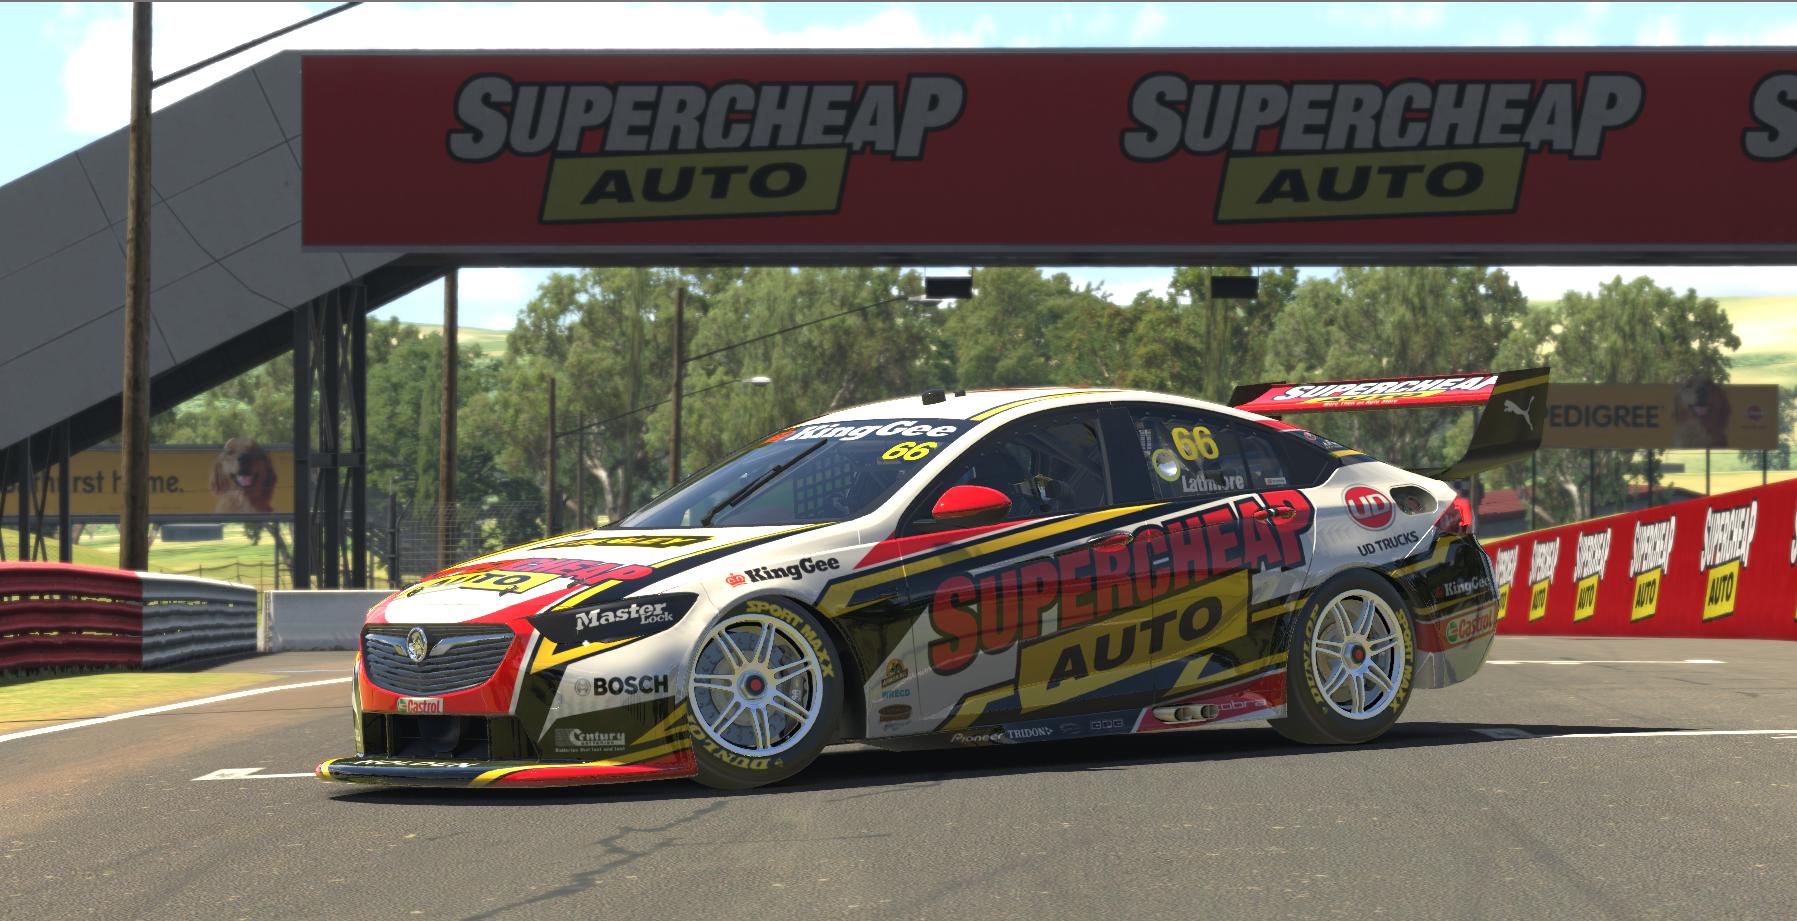 Preview of 2012 Supercheap Auto Russell Ingall by Steven Latimore